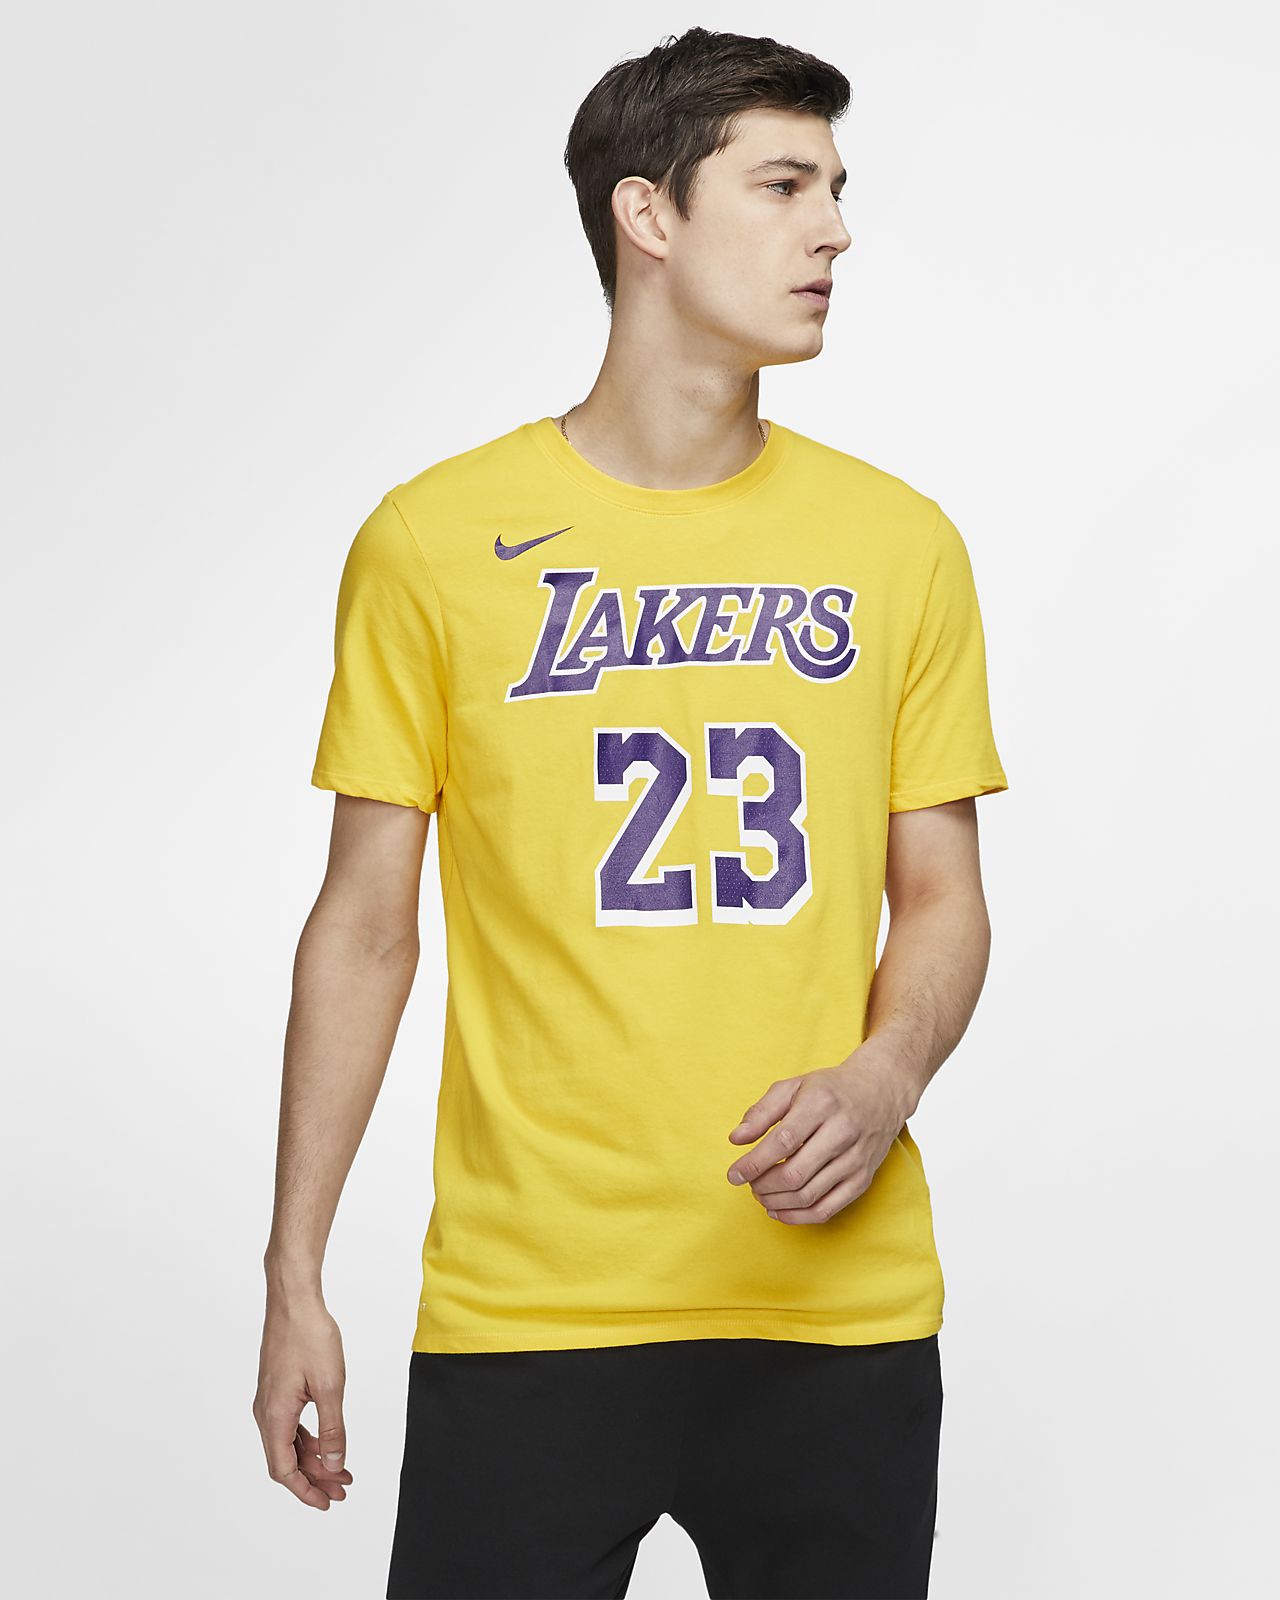 lebron james lakers baby jersey